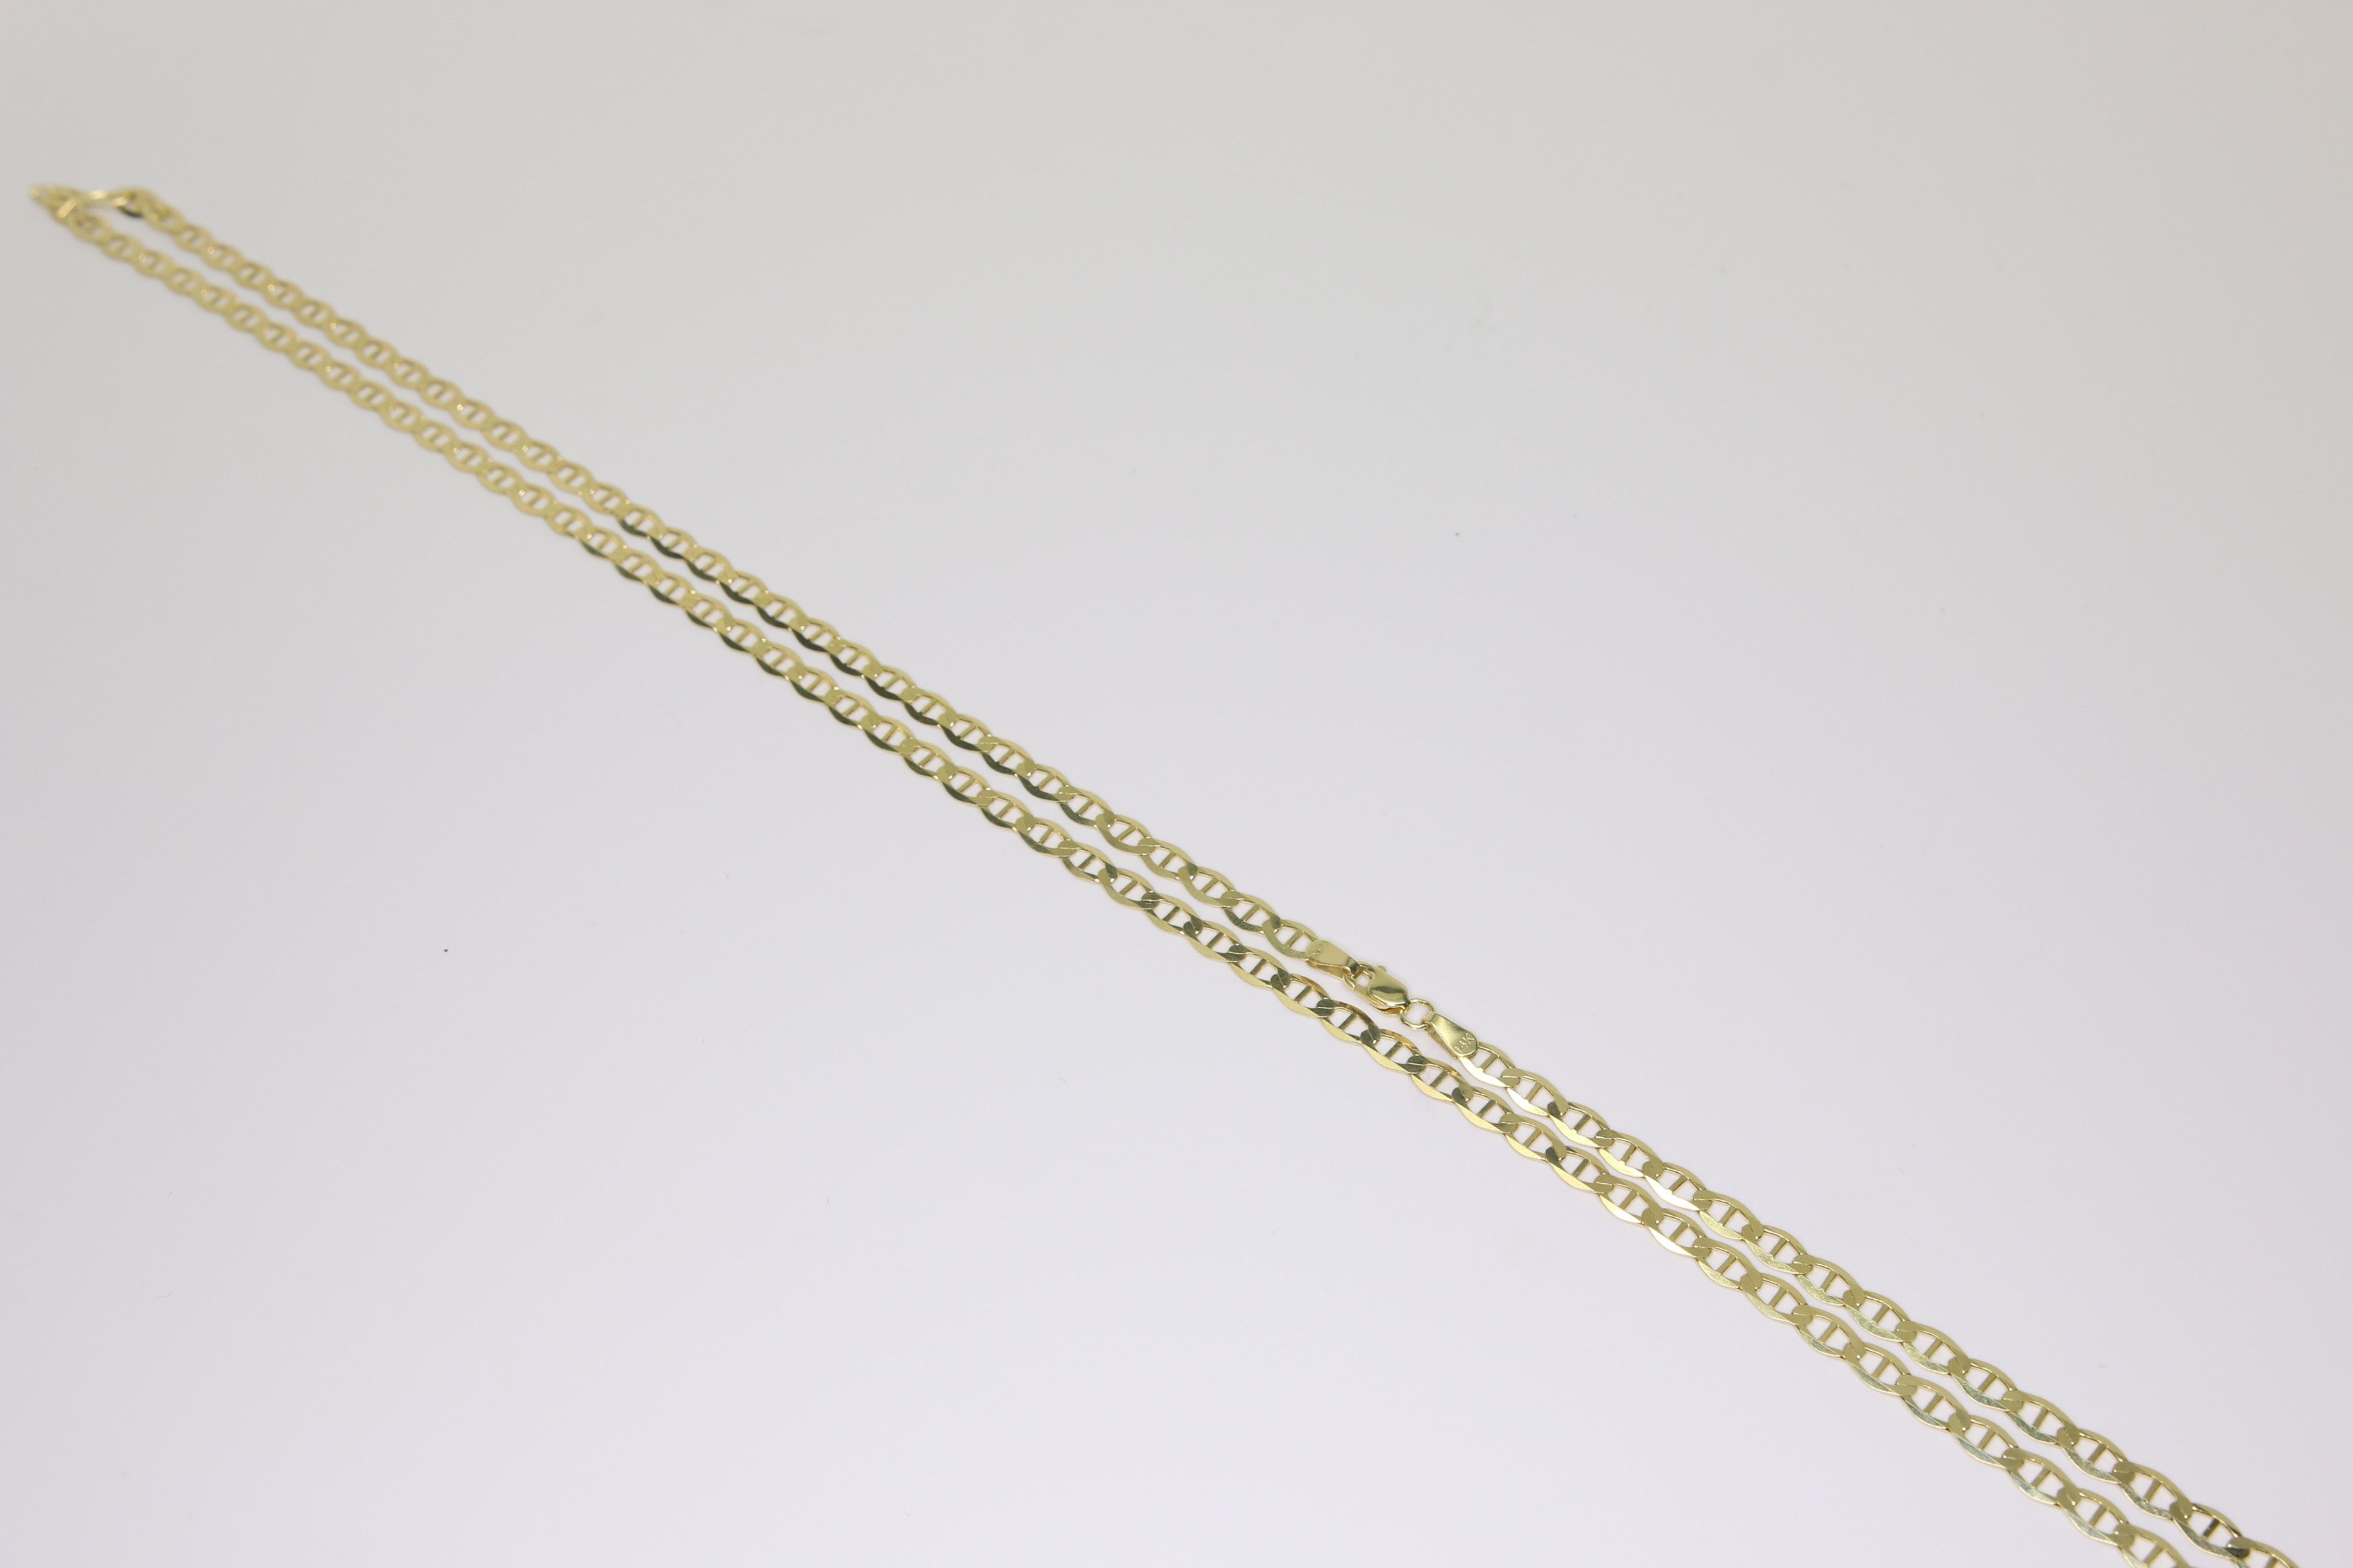 Gold 14k yellow solid gucci link chain 24" Size ONE SIZE - 2 Preview